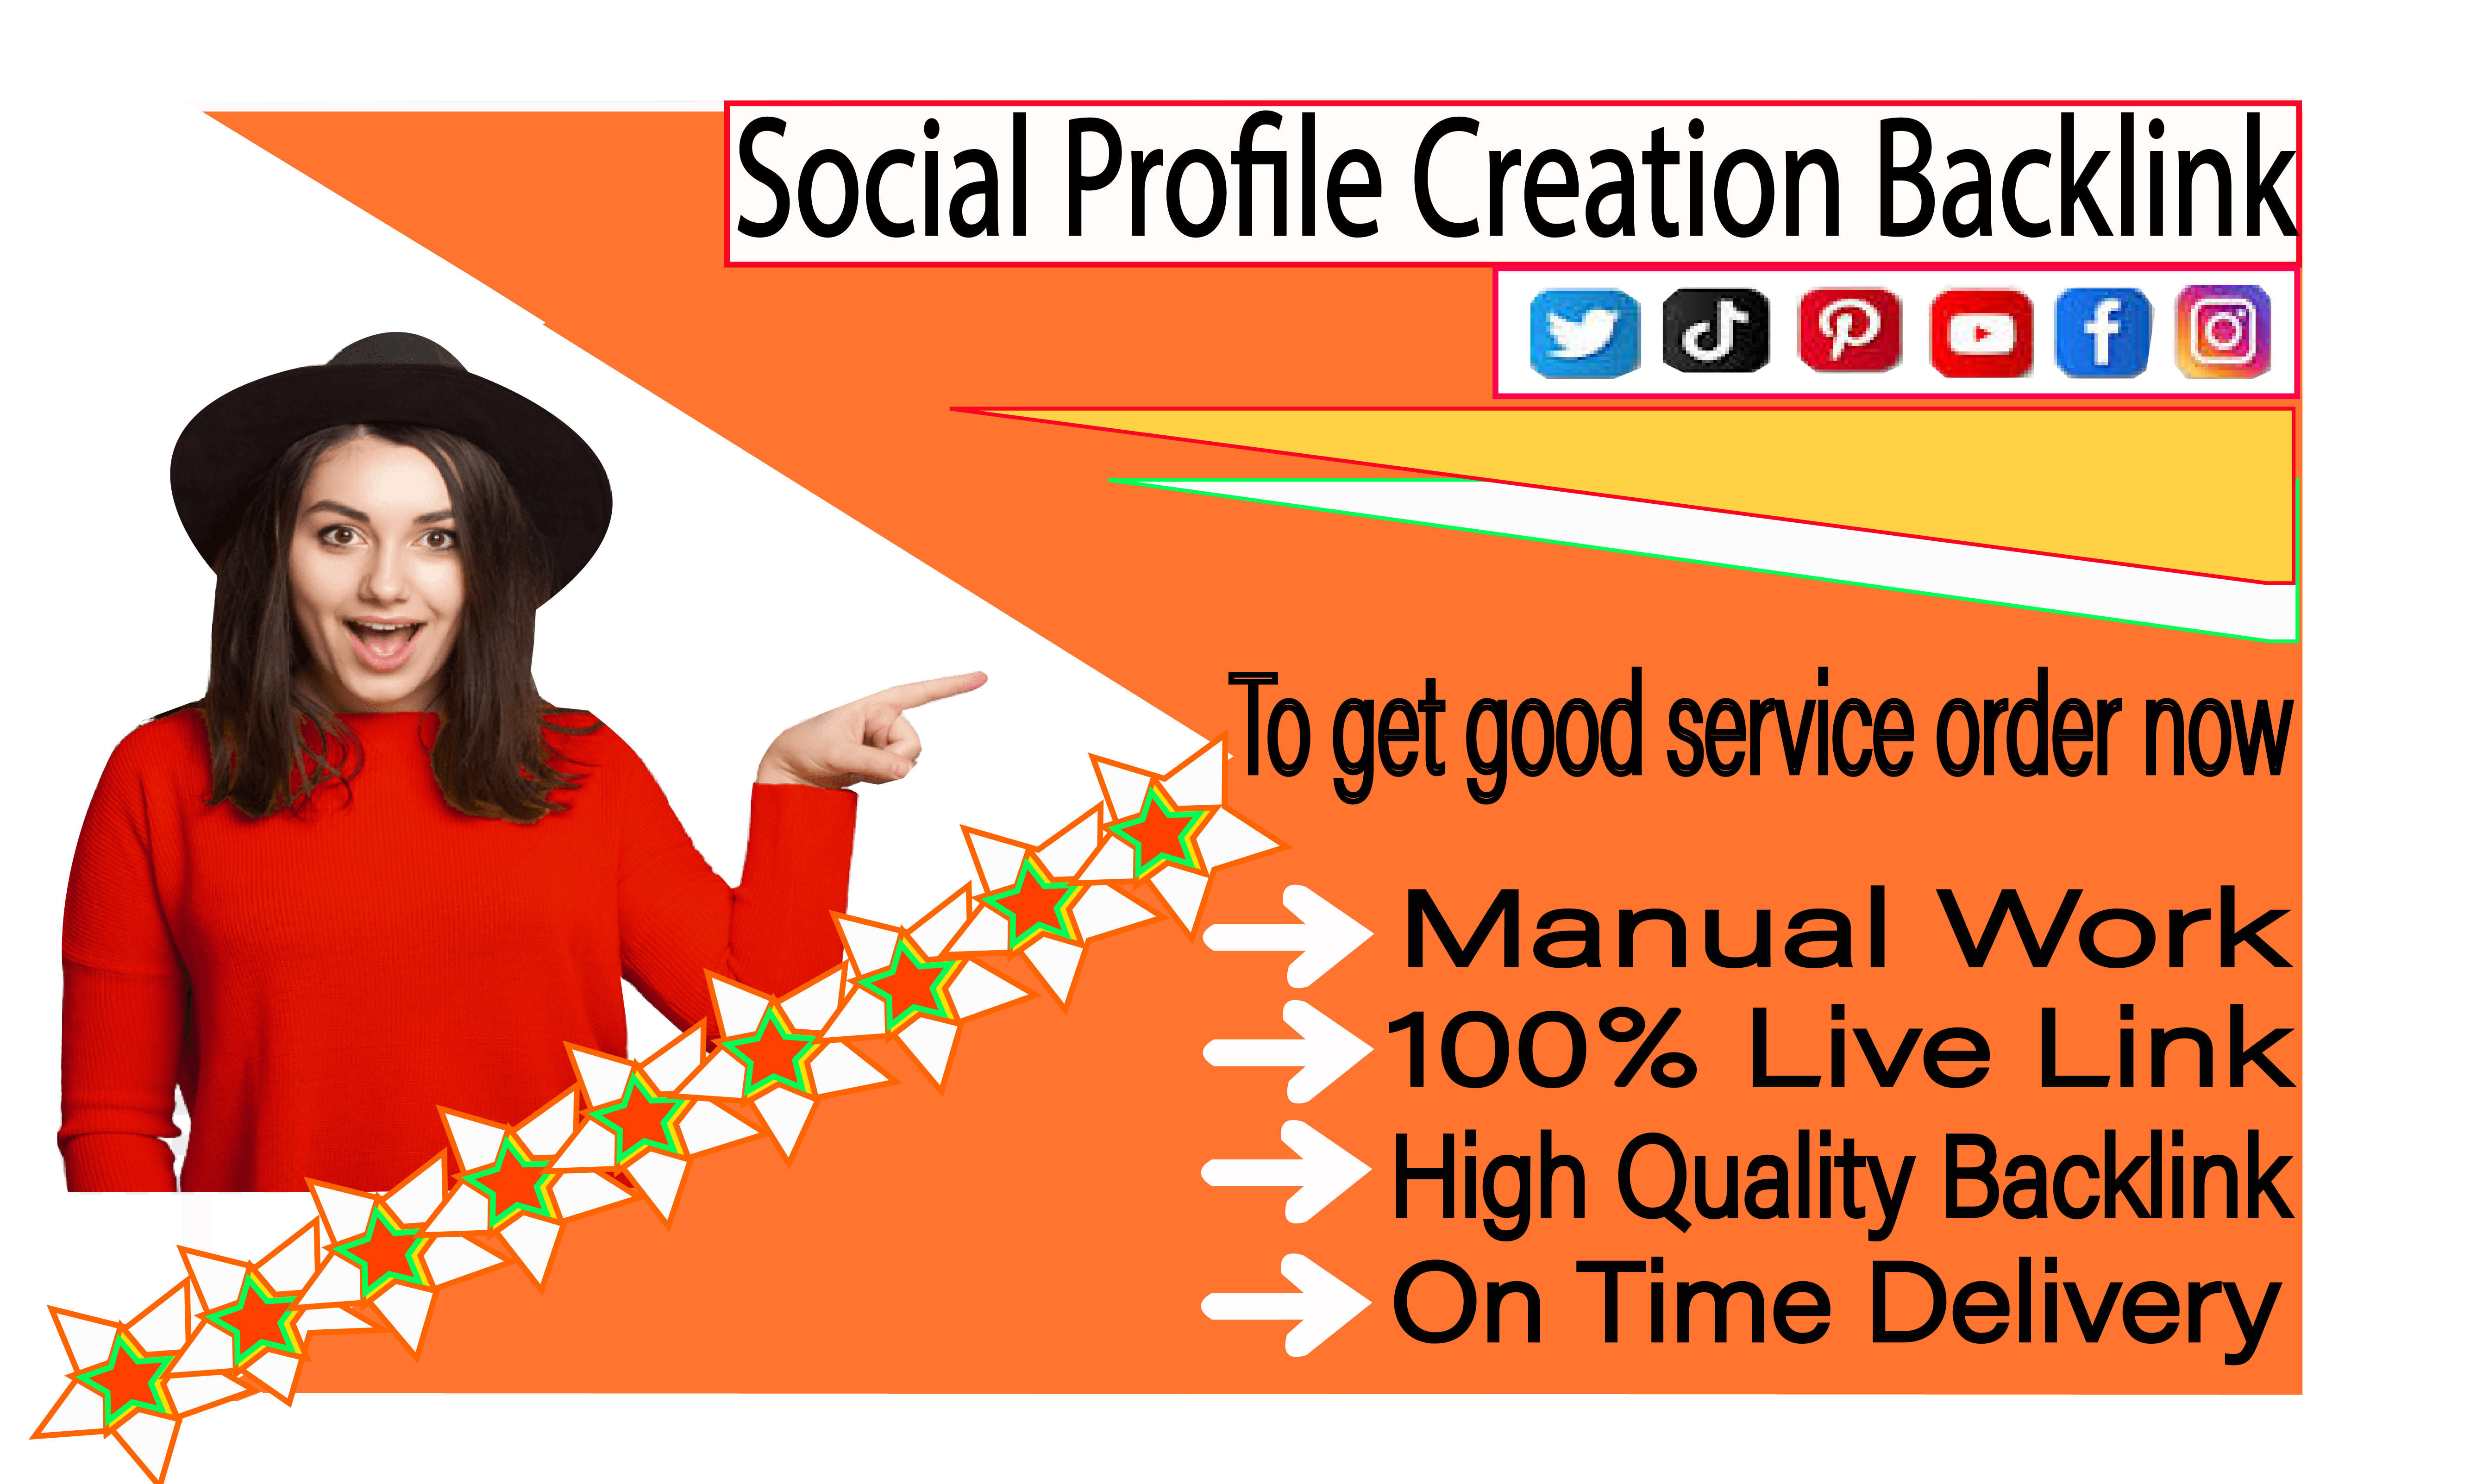 I will do 100 social media profile creation backlinks on top HQ sites